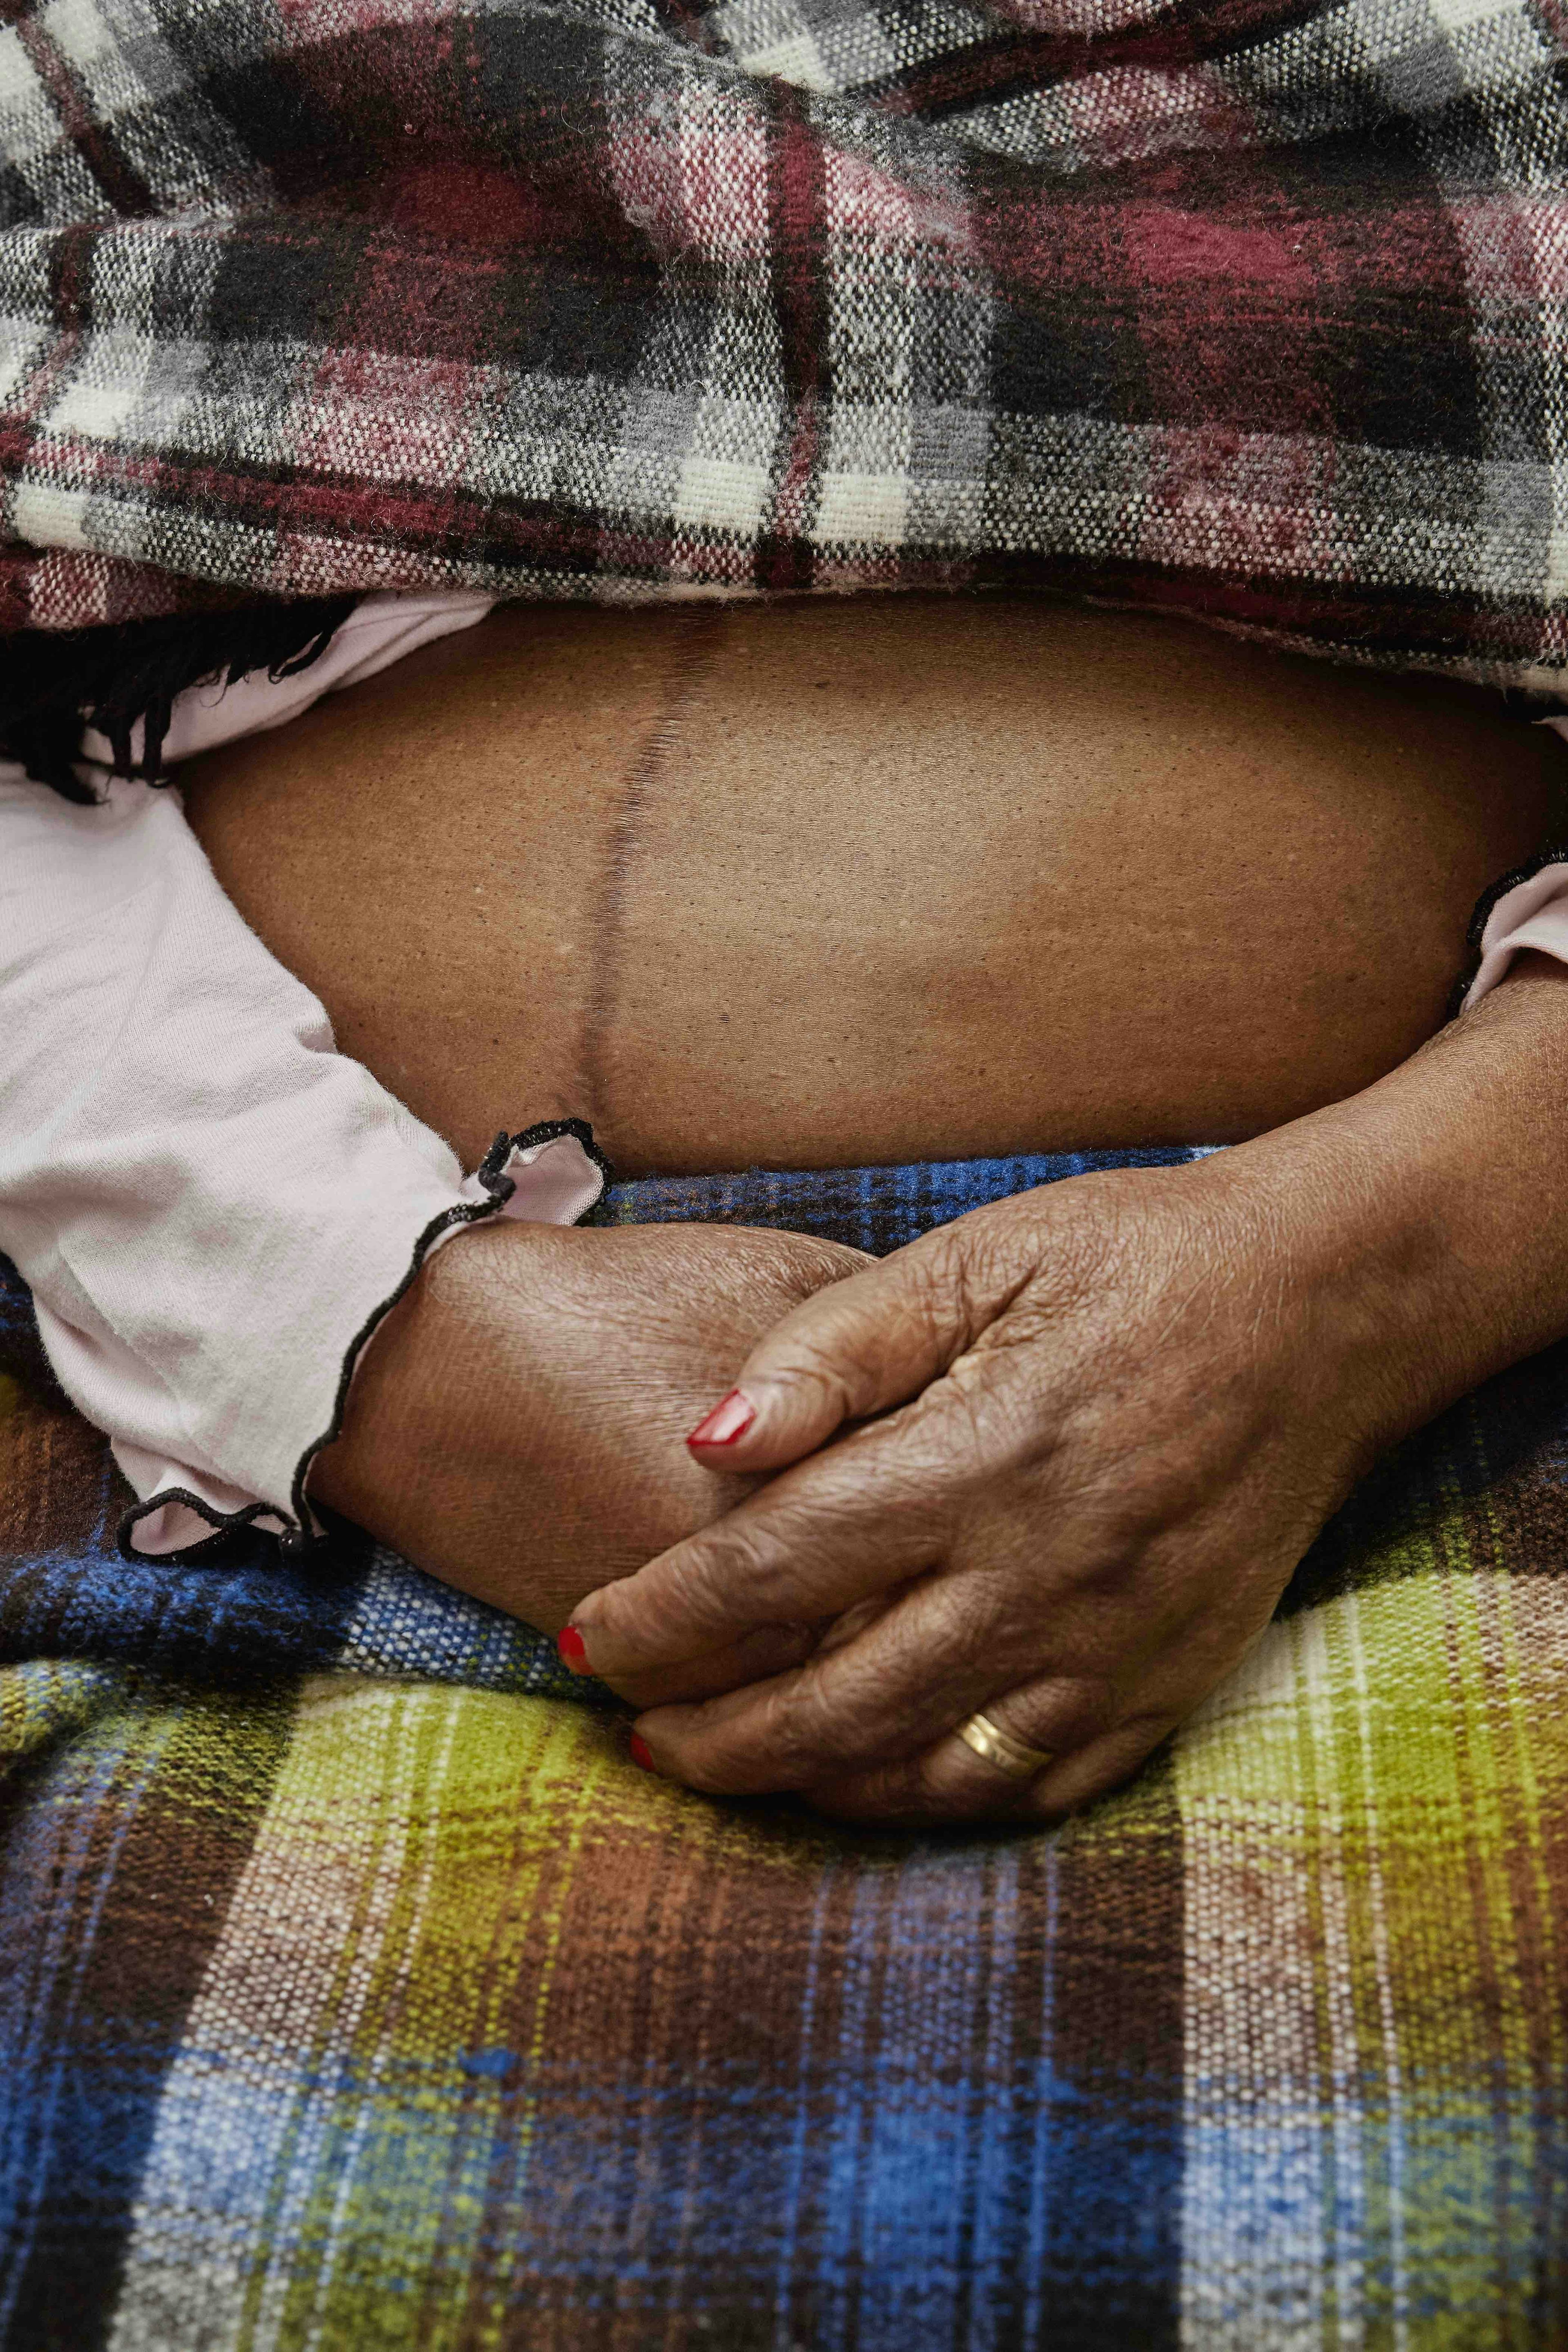 Zoomed in image of a belly, showing a scar, and the hands of a Black woman, with checkered clothing. © Thero Makepe